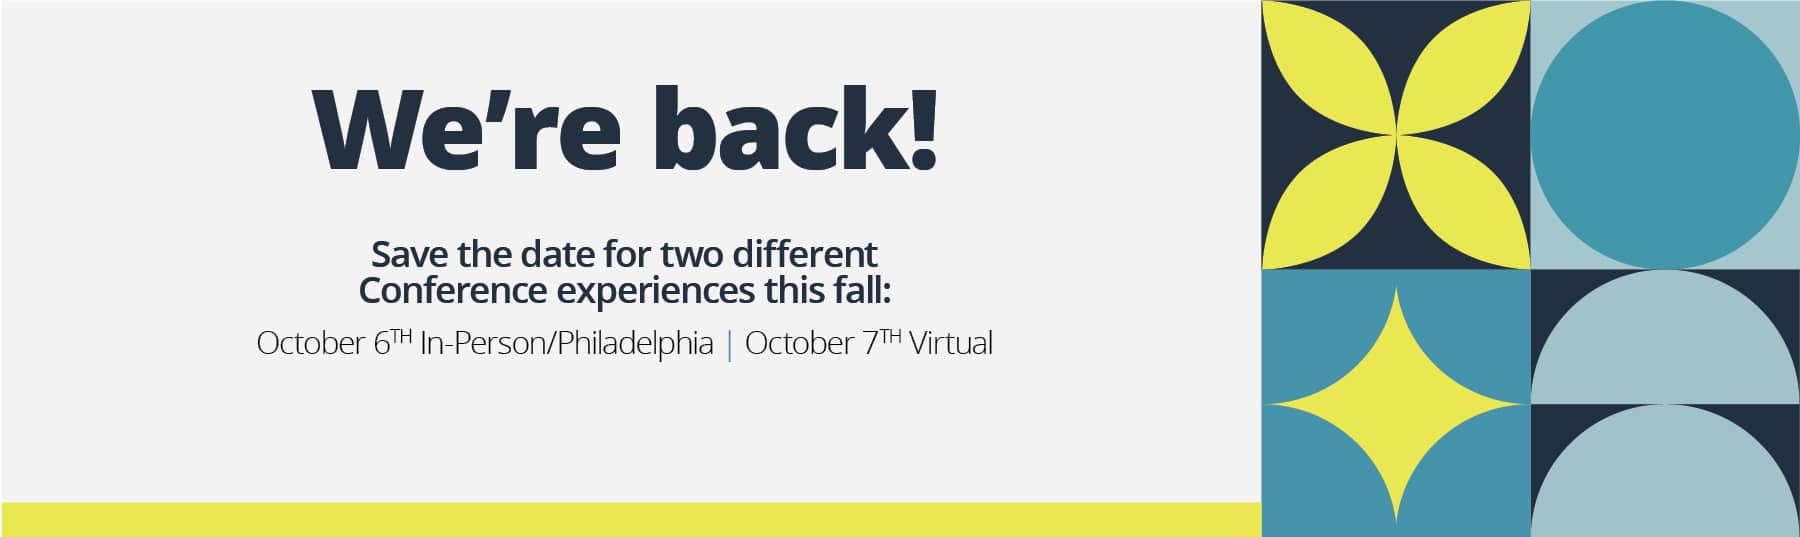 We're back! Join us in person October 6 and online October 7.